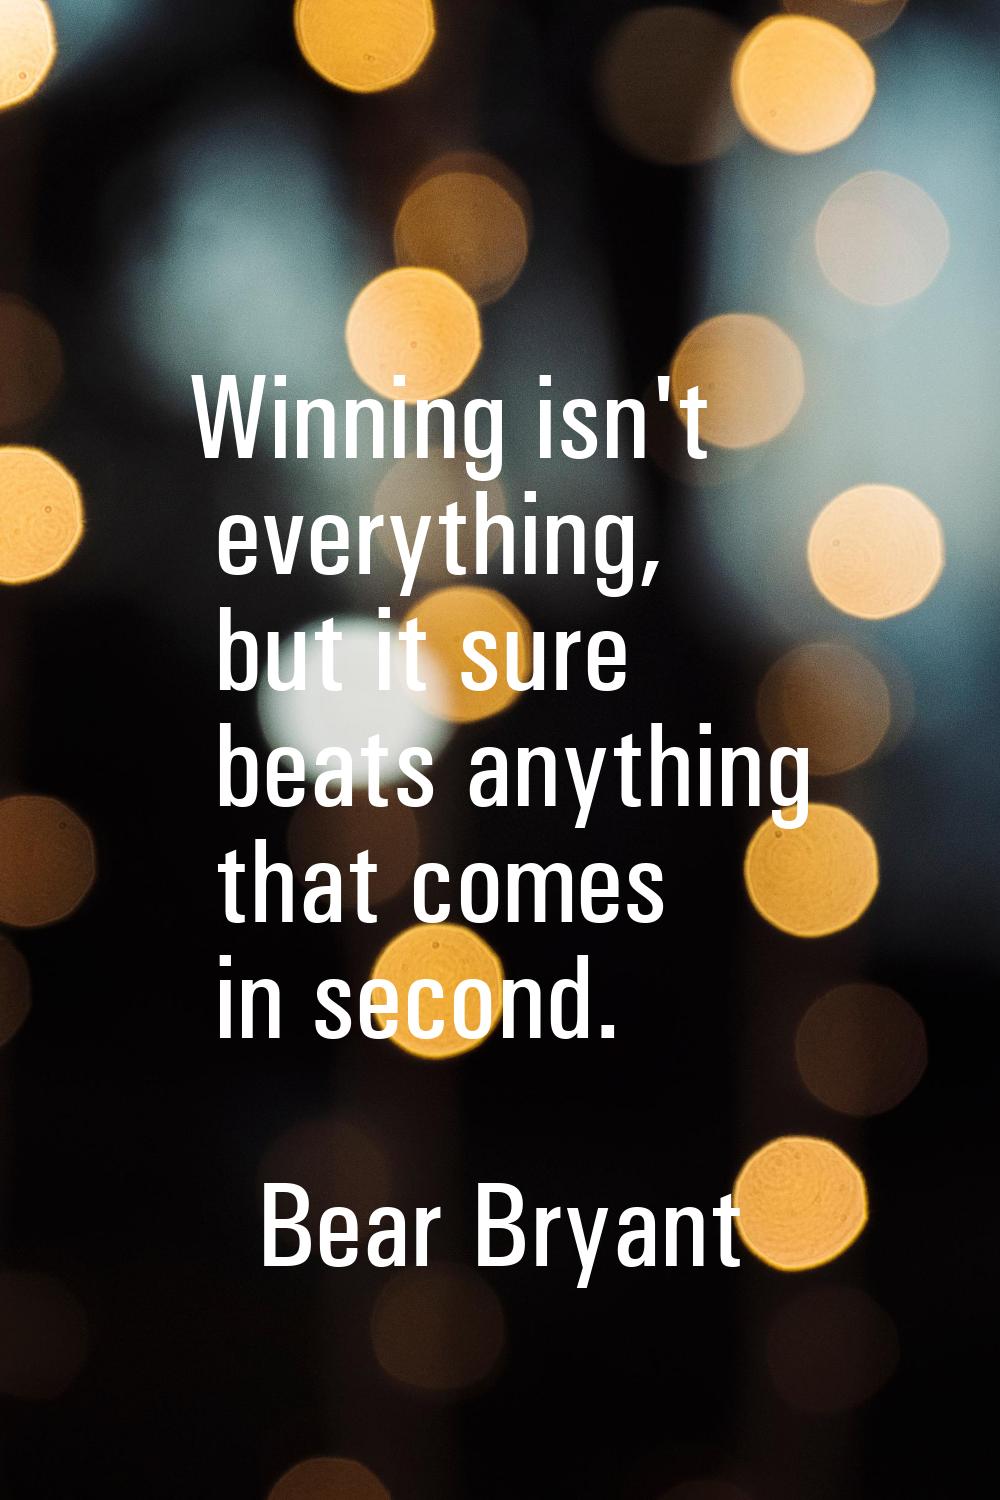 Winning isn't everything, but it sure beats anything that comes in second.